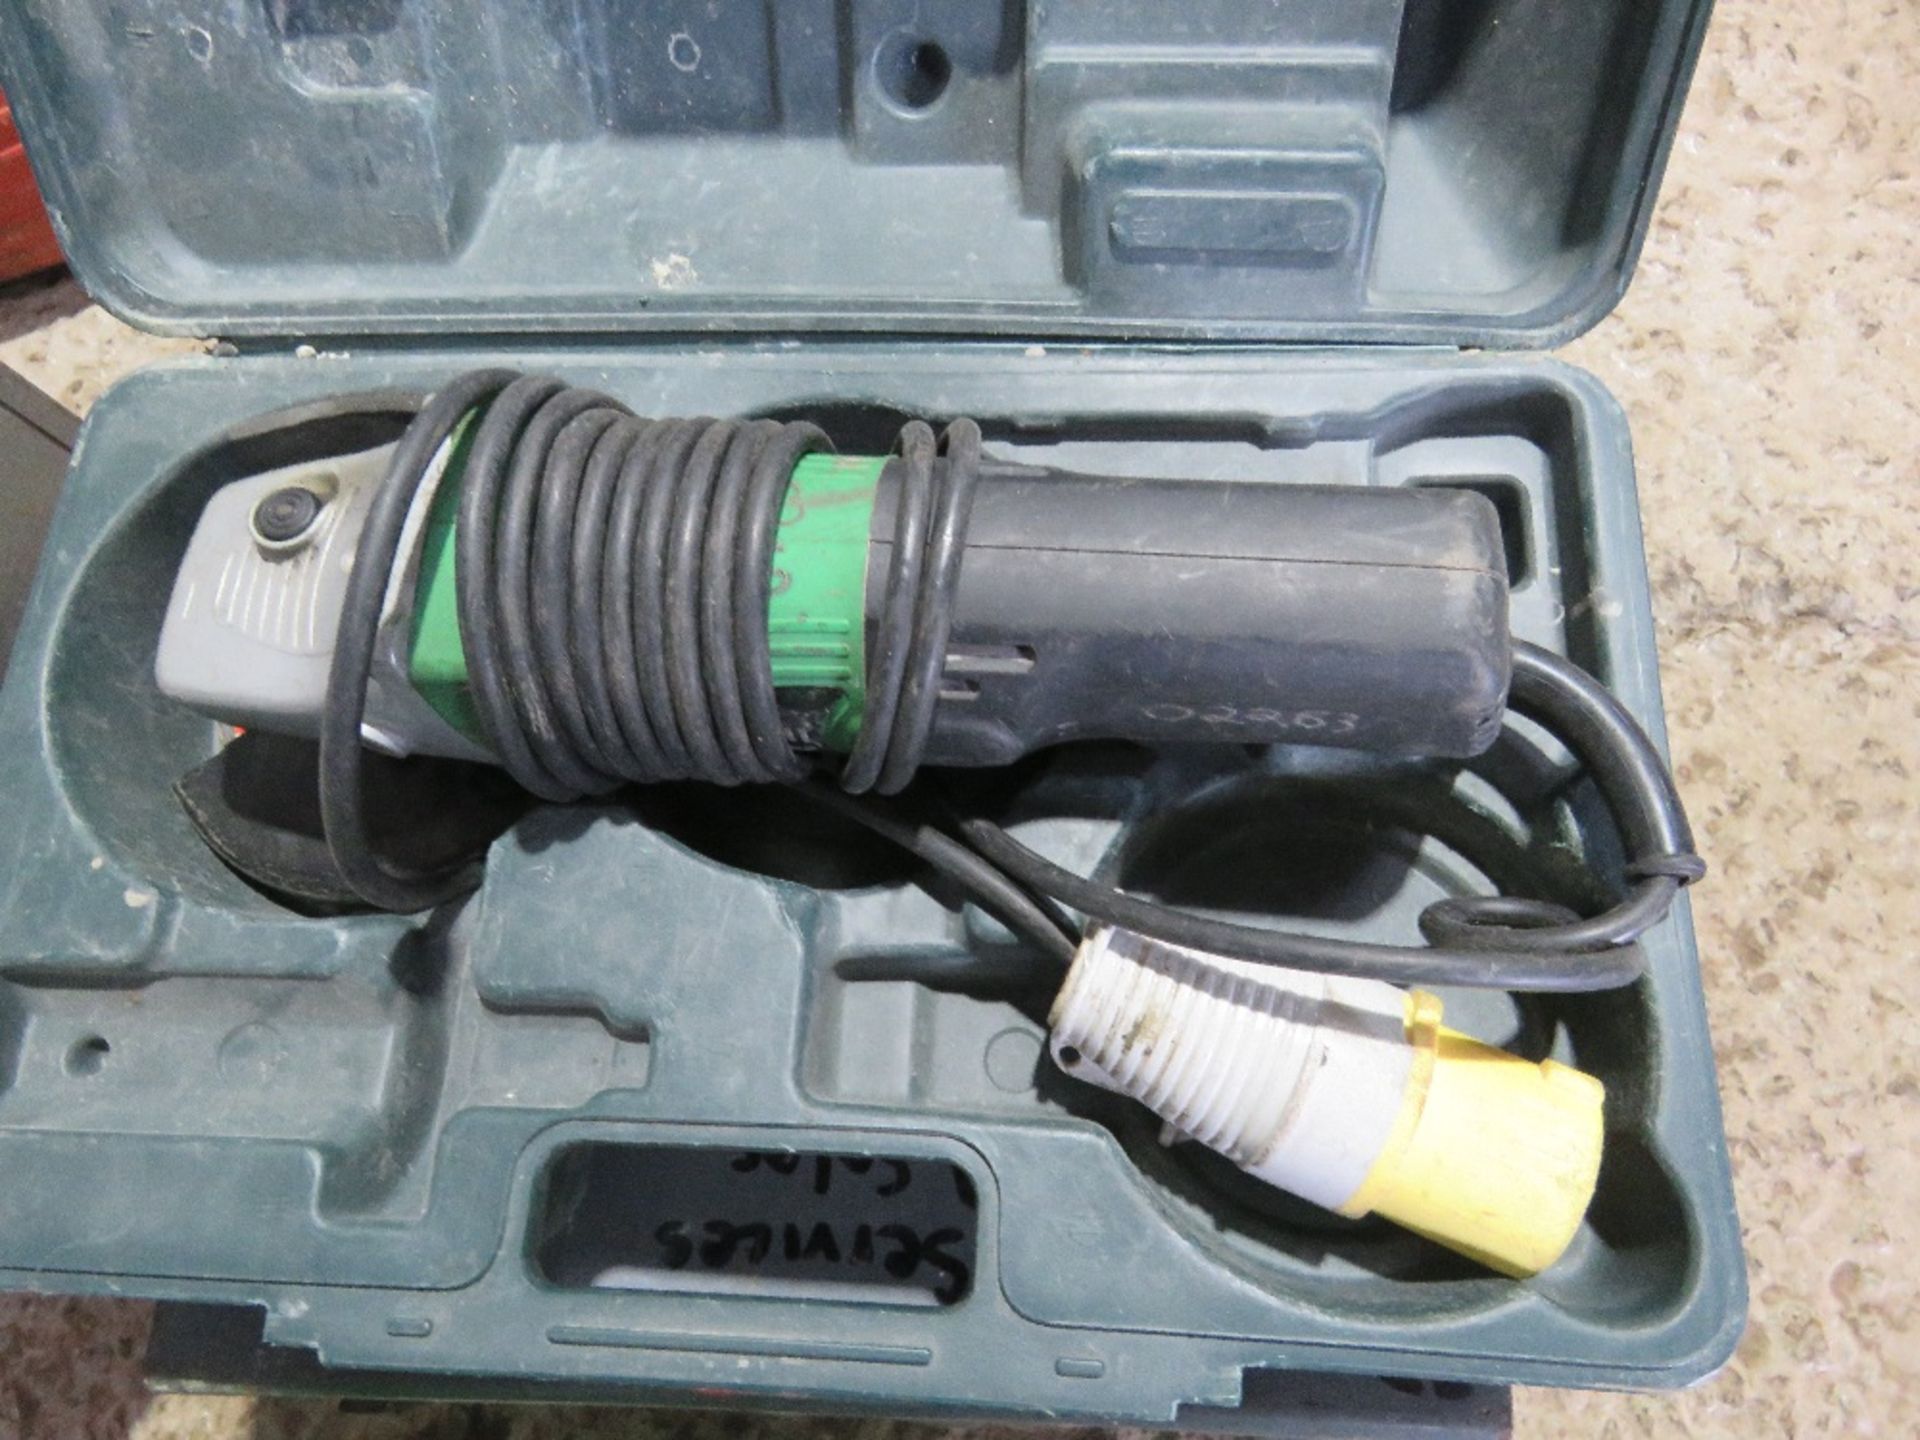 2 X POWER TOOLS: ANGLE GRINDER AND PLANER, 110VOLT POWERED. - Image 2 of 5